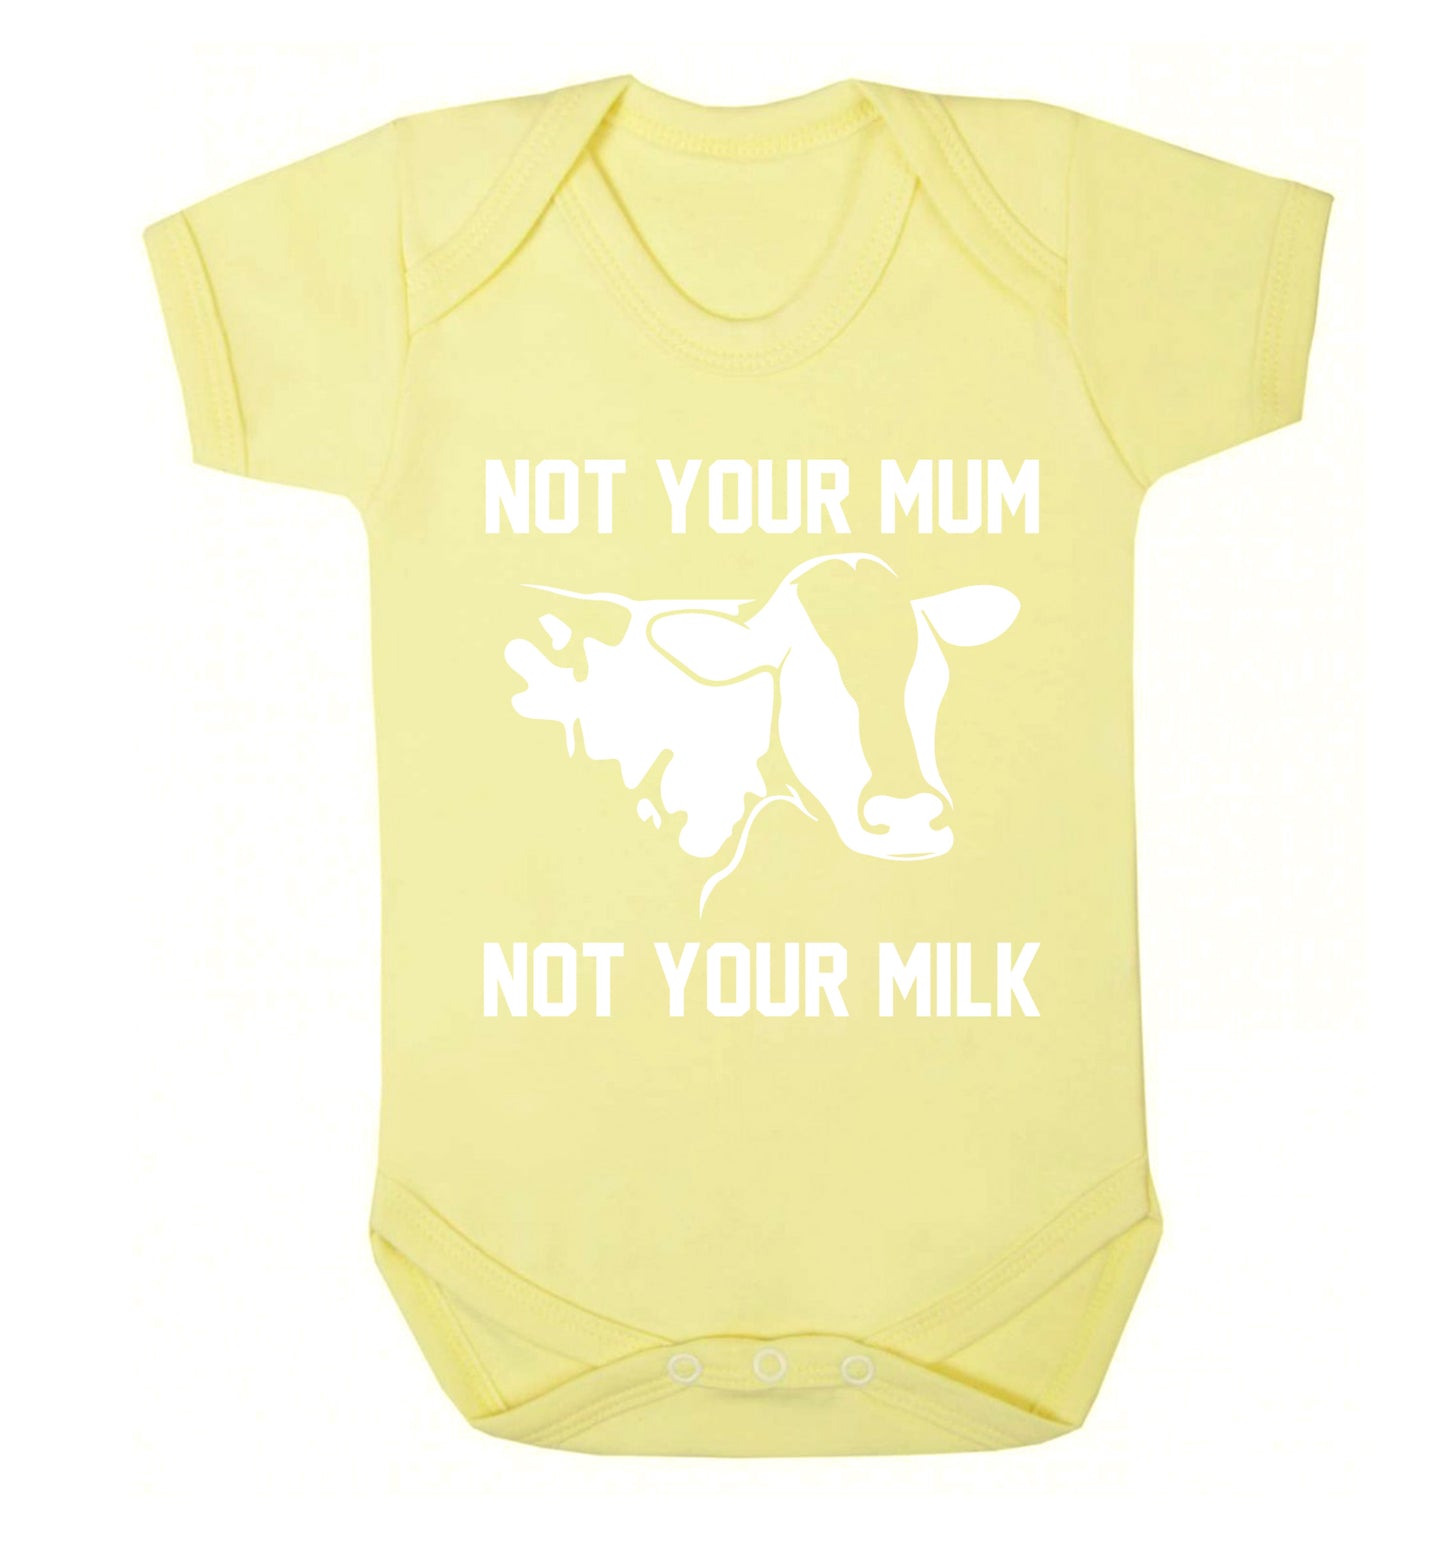 Not your mum not your milk Baby Vest pale yellow 18-24 months